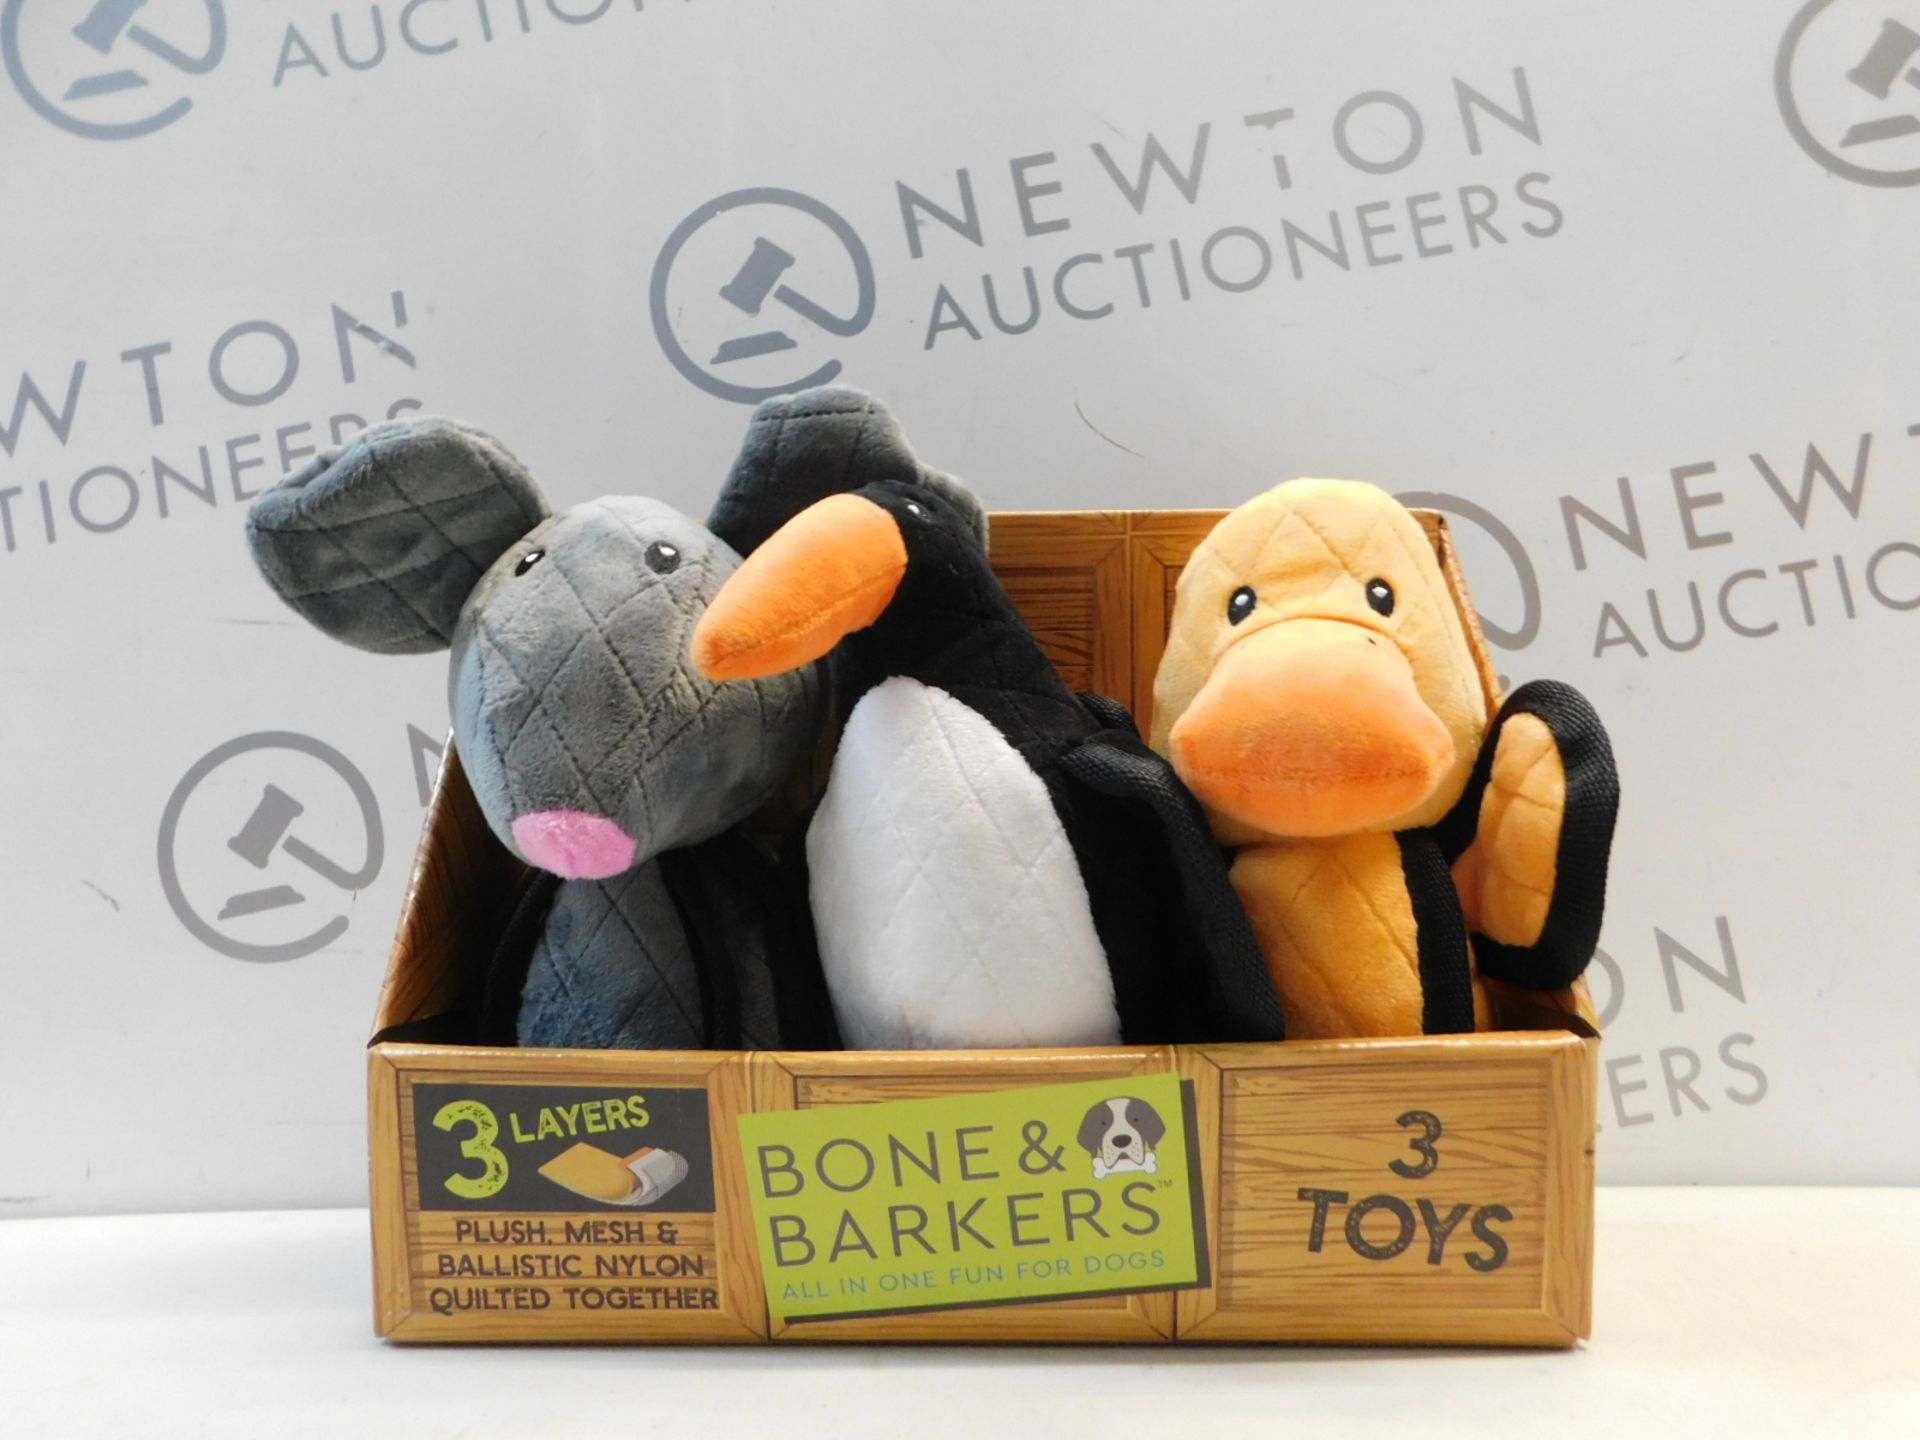 1 PACK OF 3 BONE & BAKERS DOG TOYS RRP £24.99